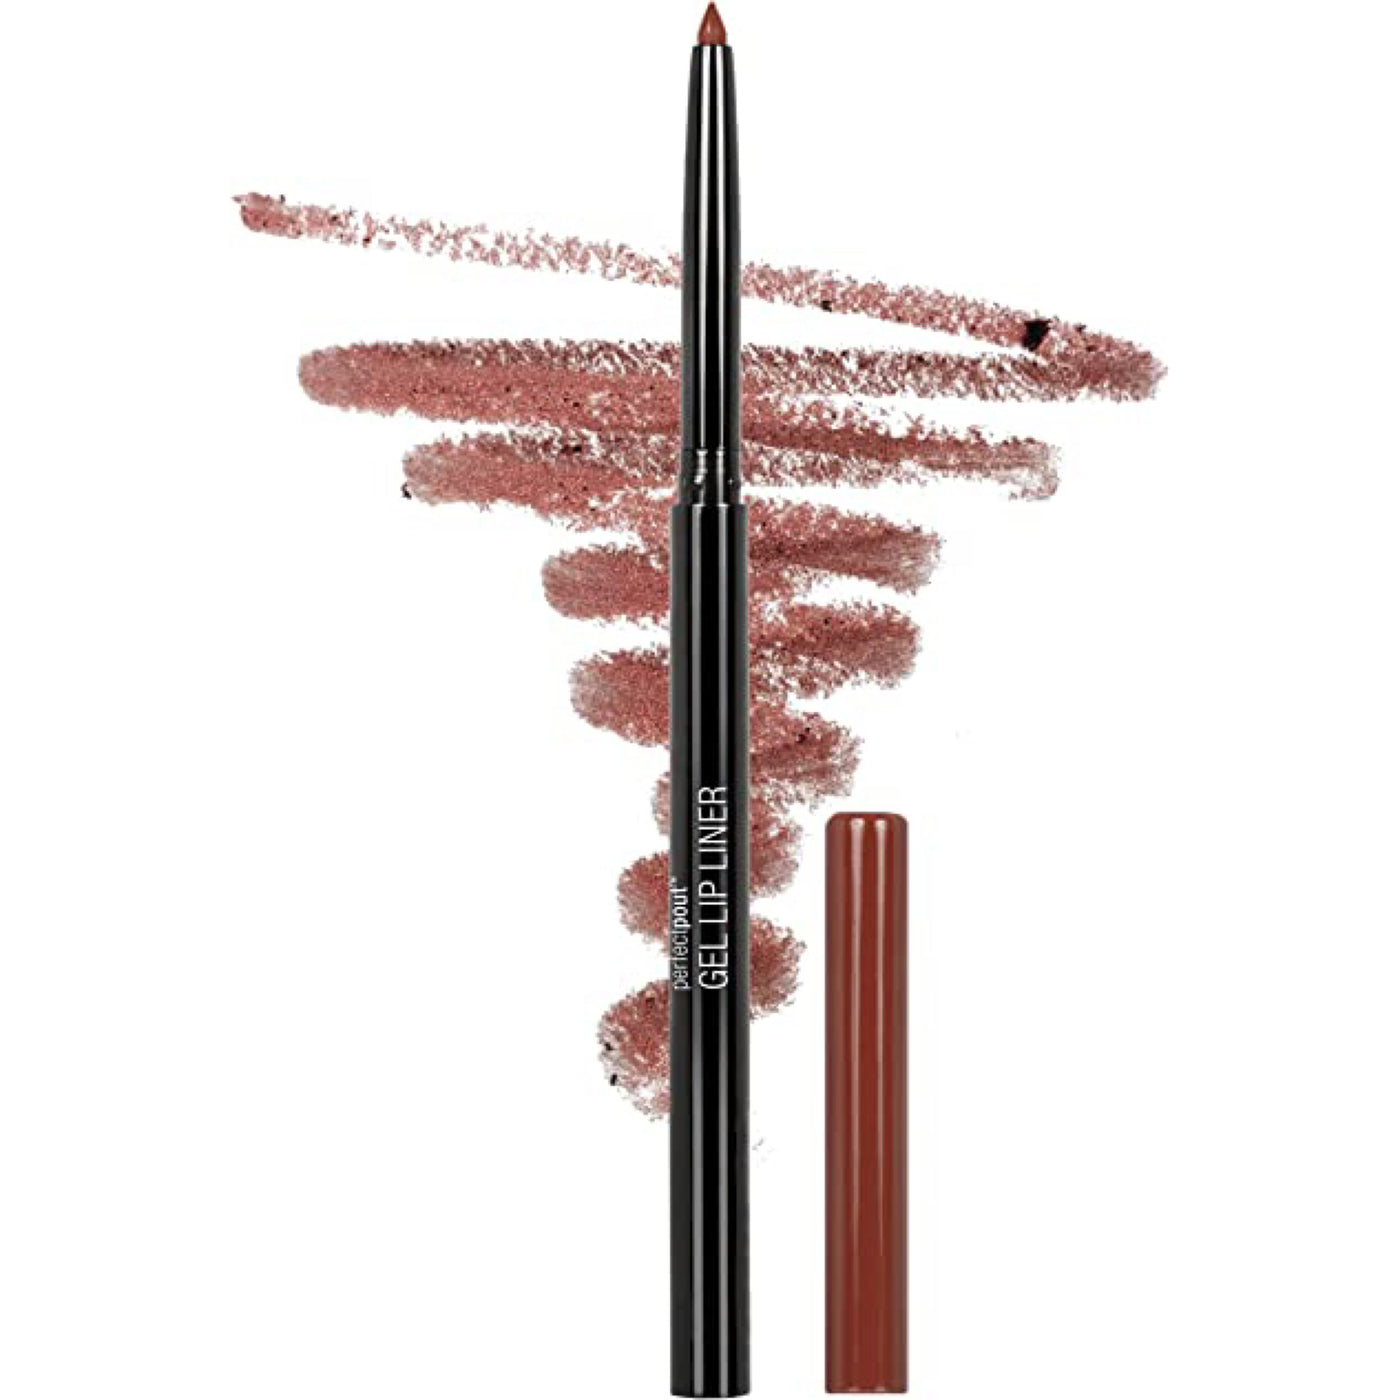 Wet & Wild - bare to comment lip liner